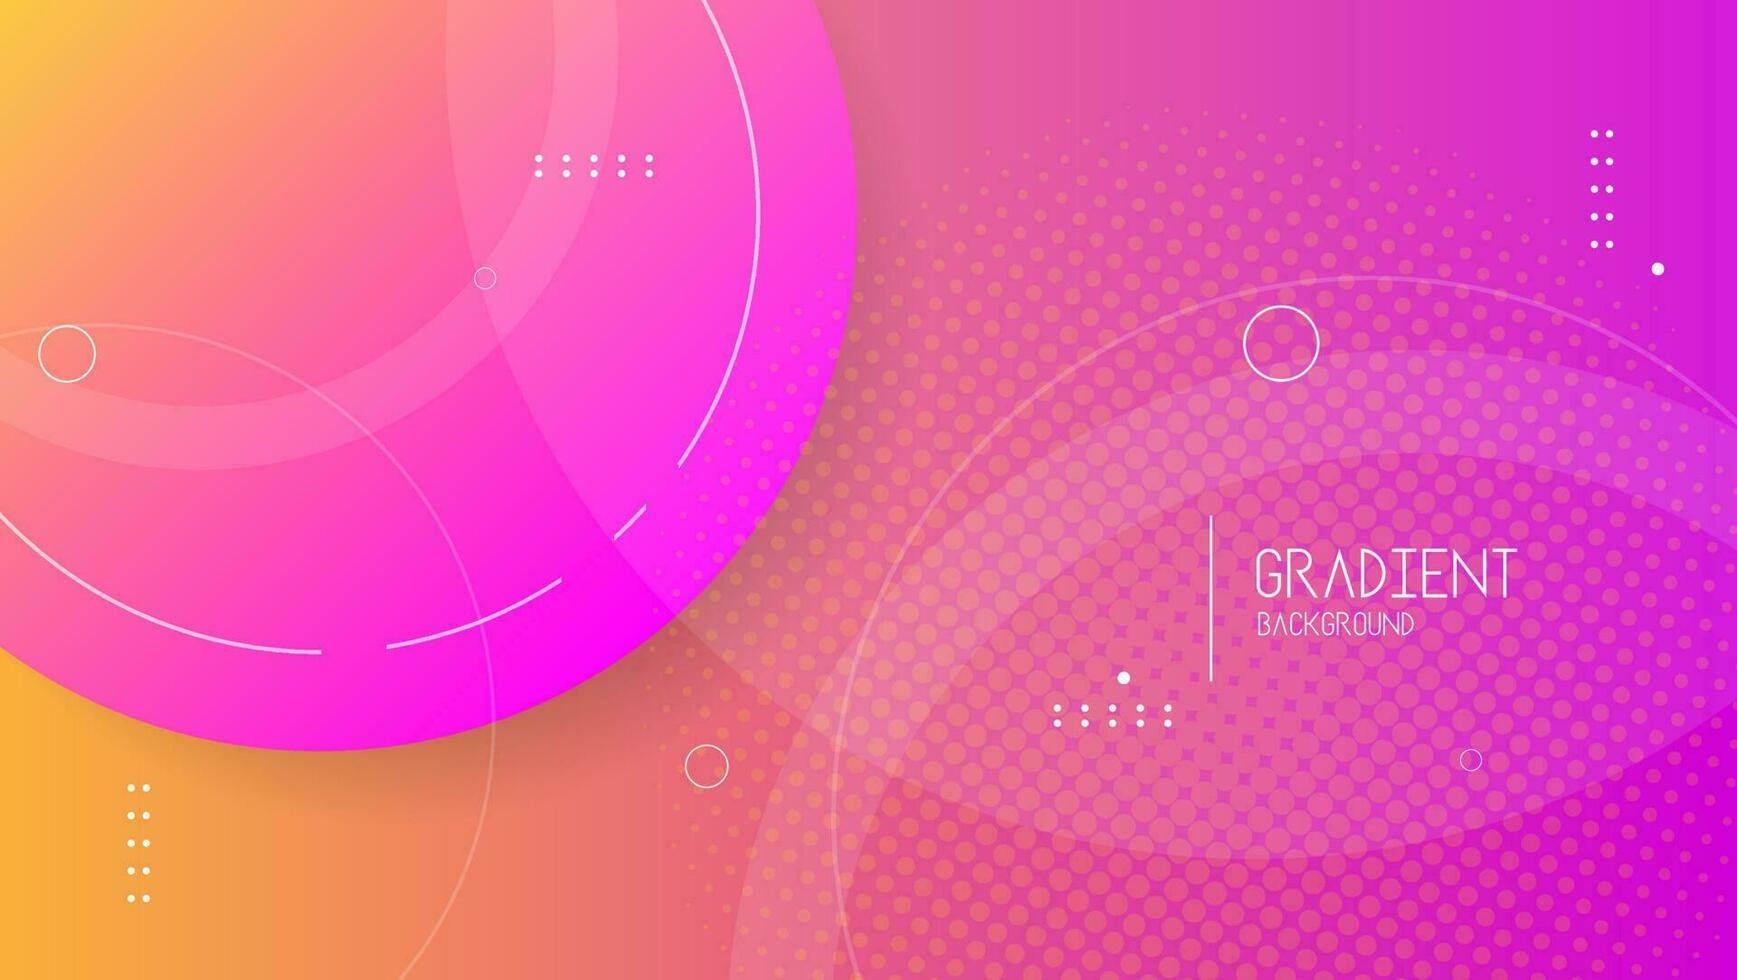 abstract gradient orange and pink circular background with halftone. vector illustration